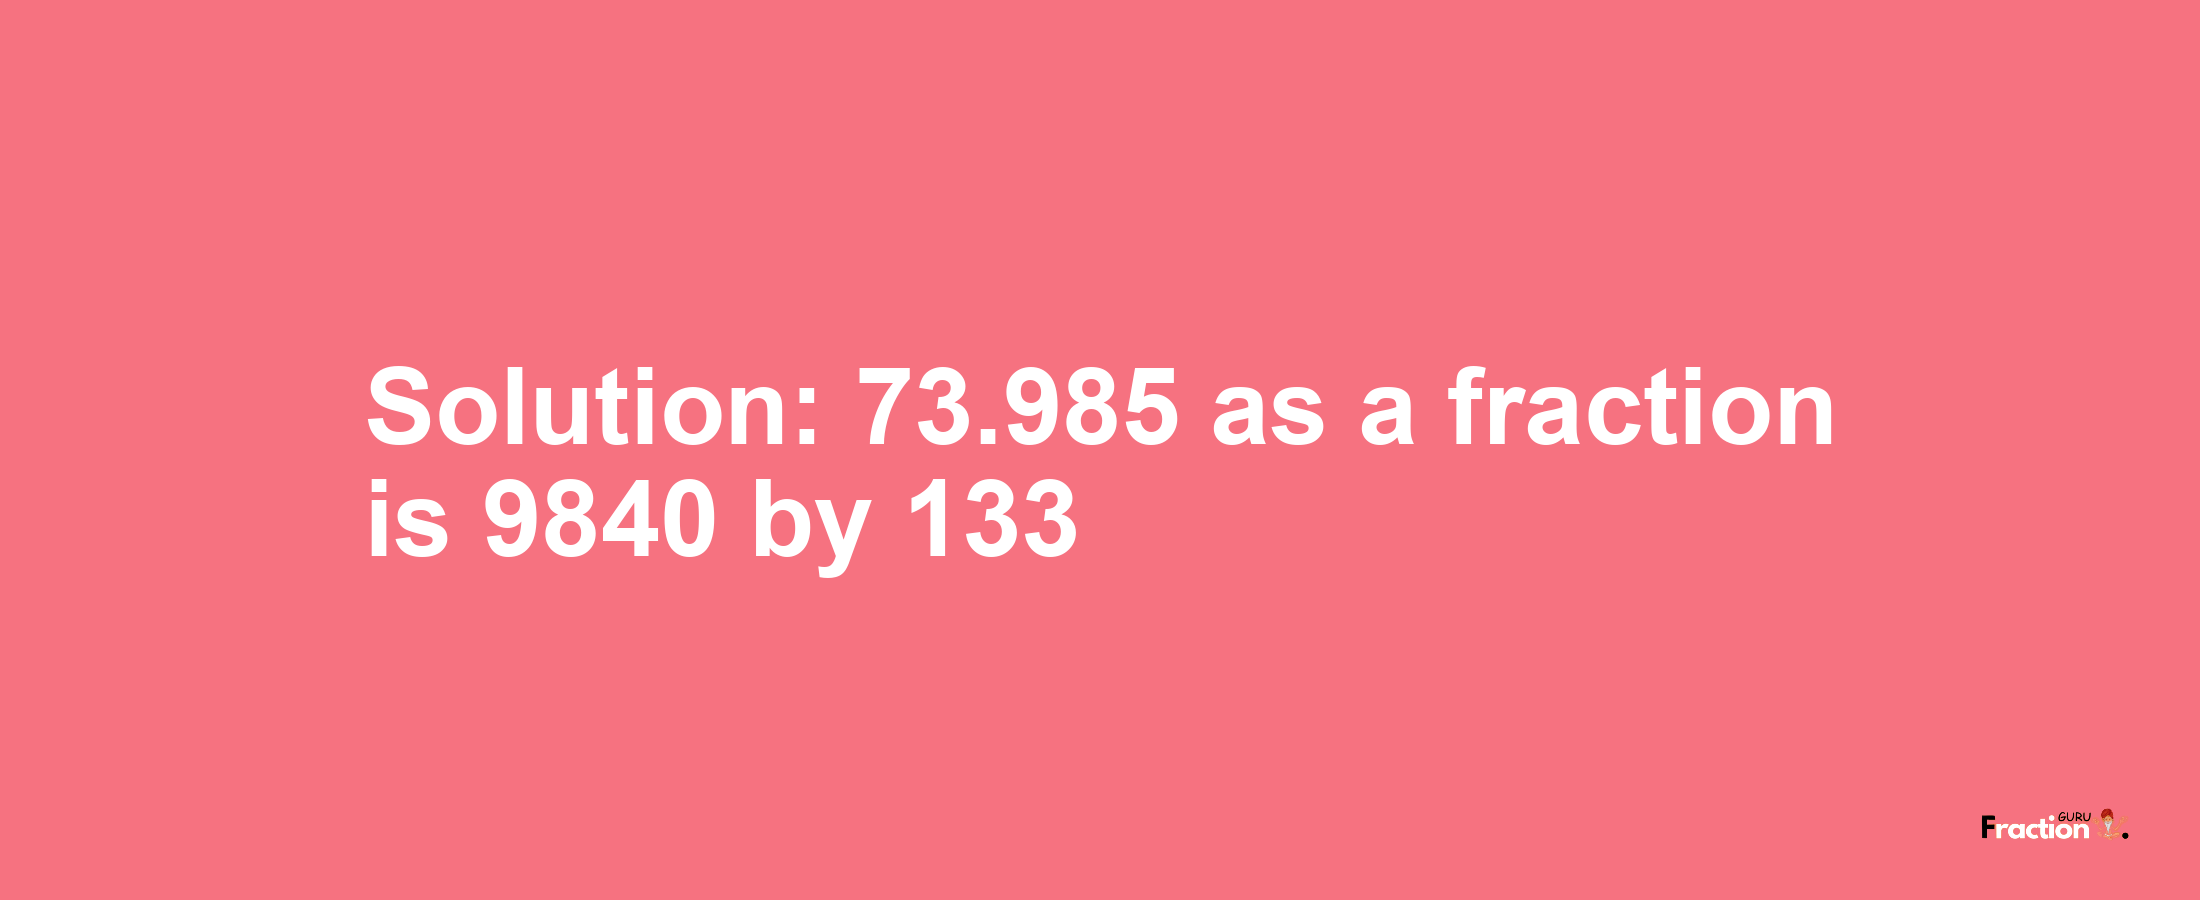 Solution:73.985 as a fraction is 9840/133